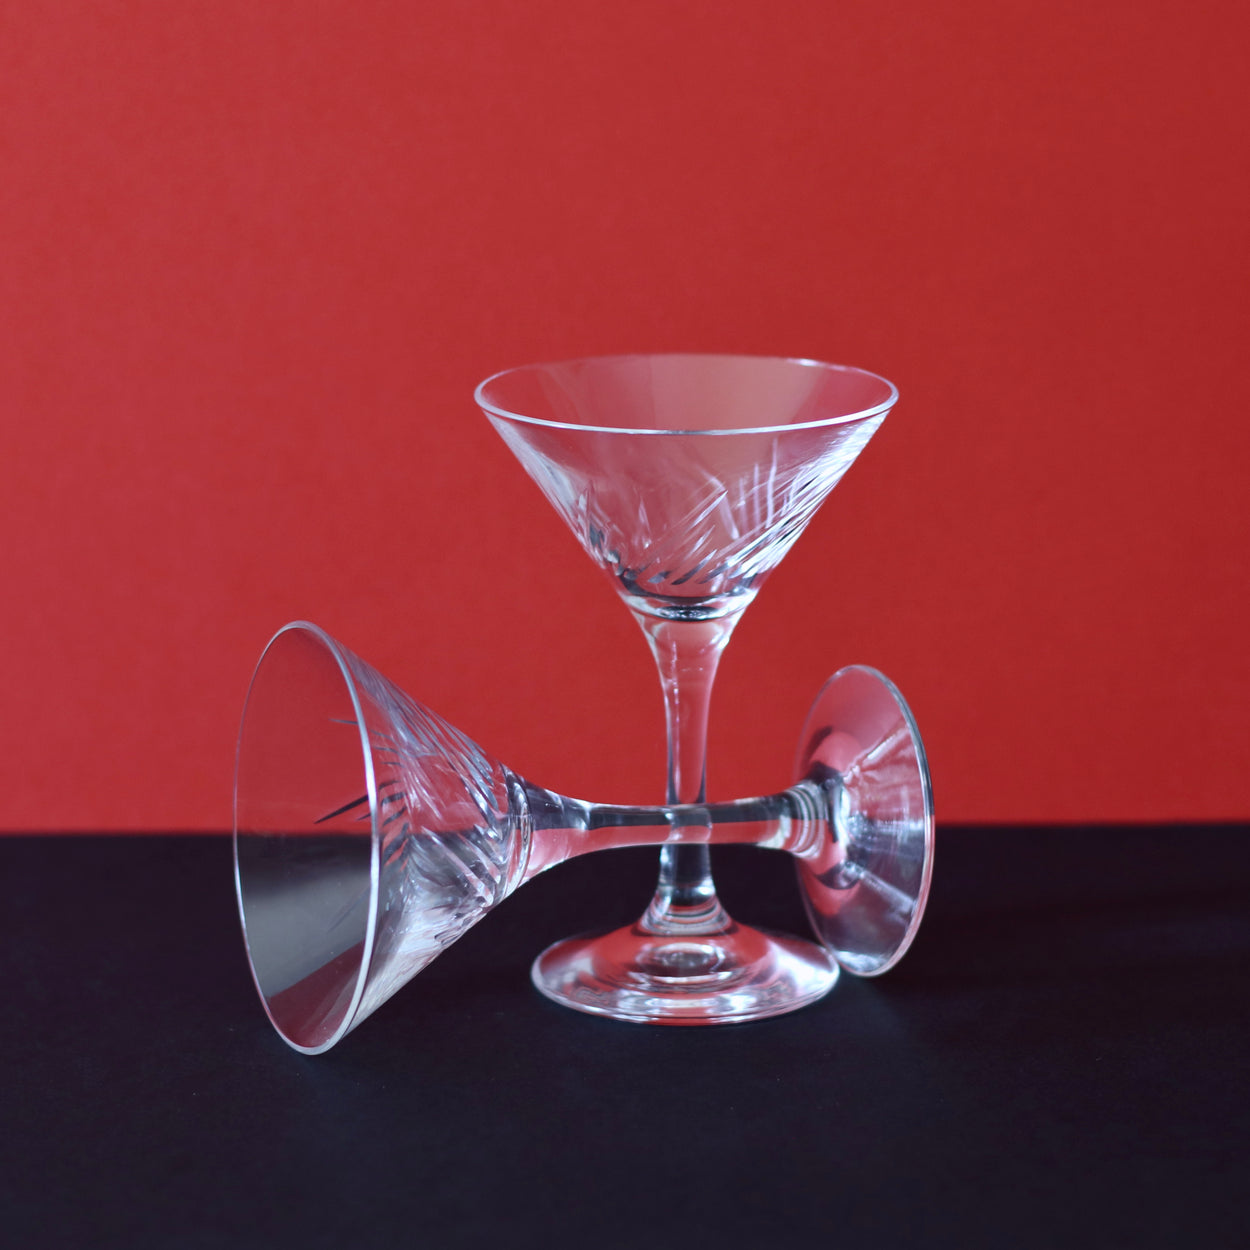 Japanese martini glasses x 2, one lying on it's side, against red and black backdrop.